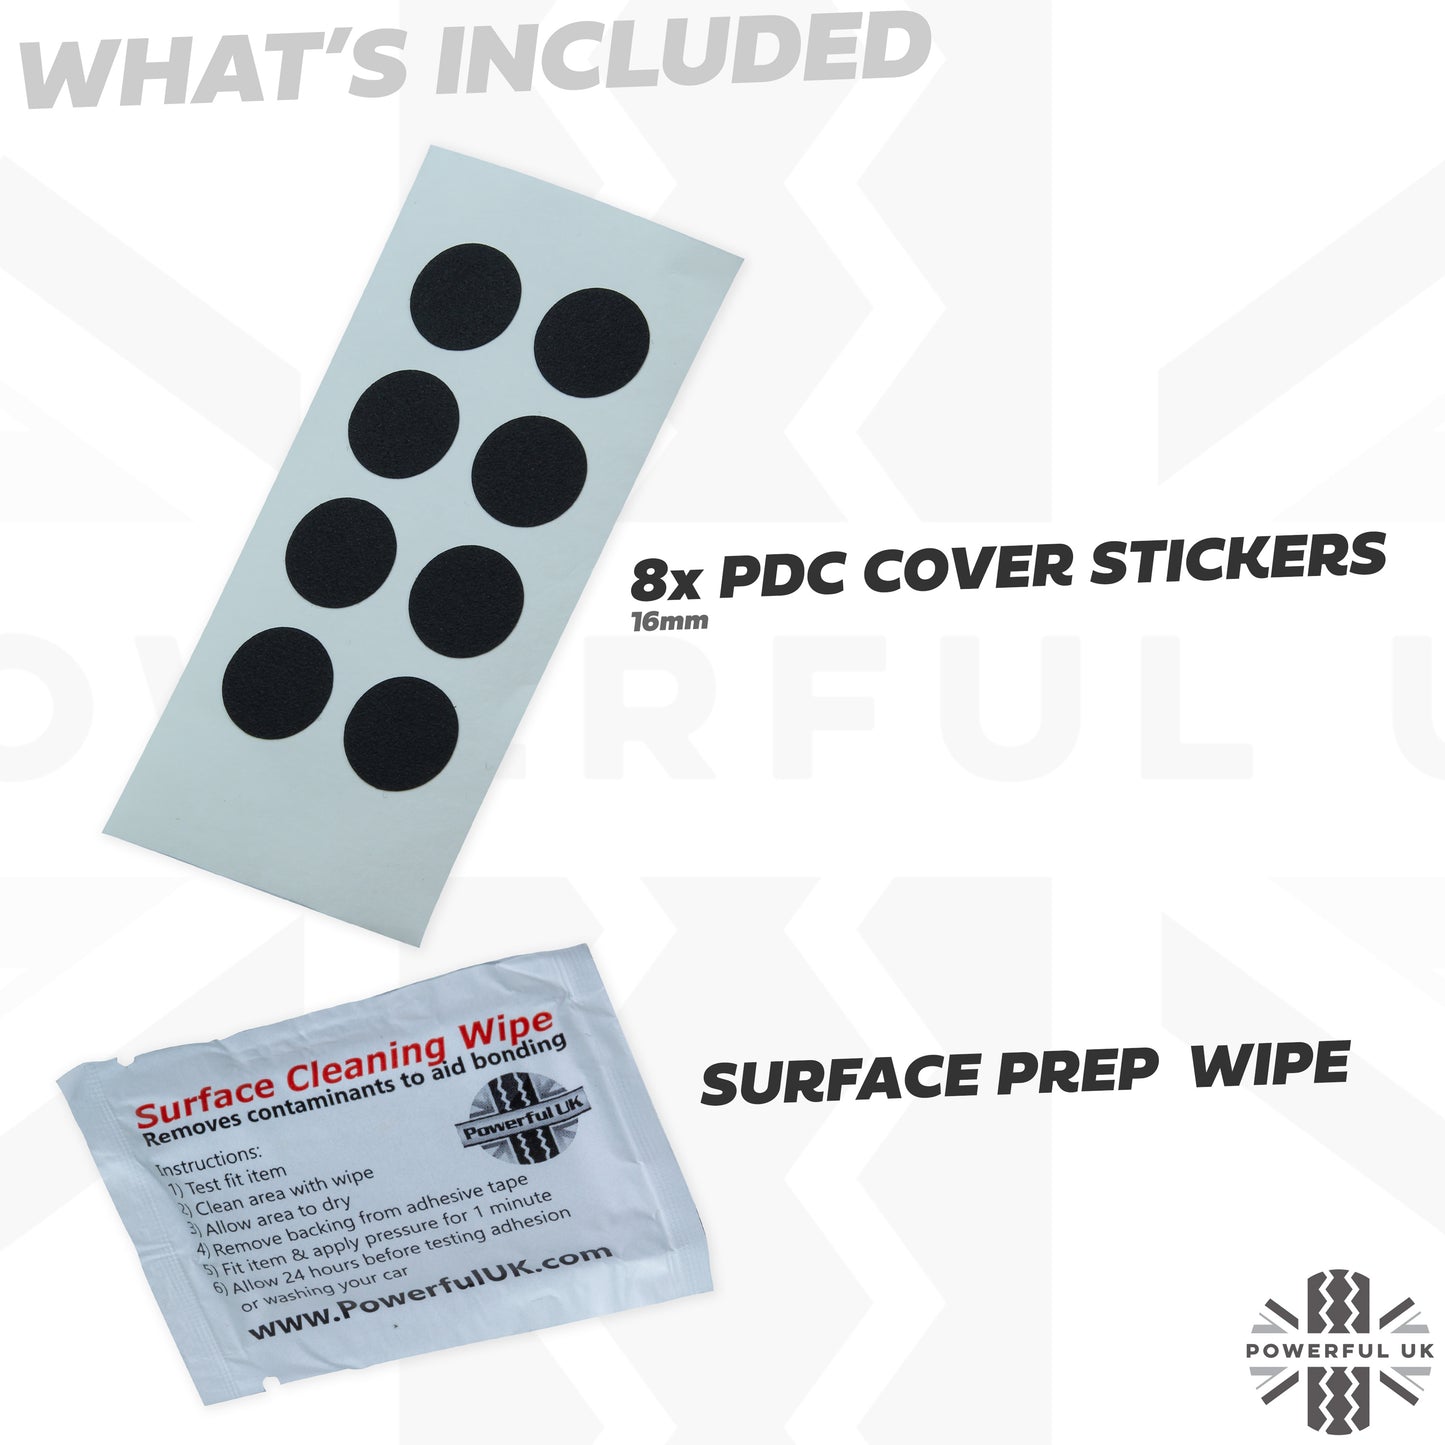 Parking Sensor Cover Stickers x 8 for Land Rover Discovery 3/4